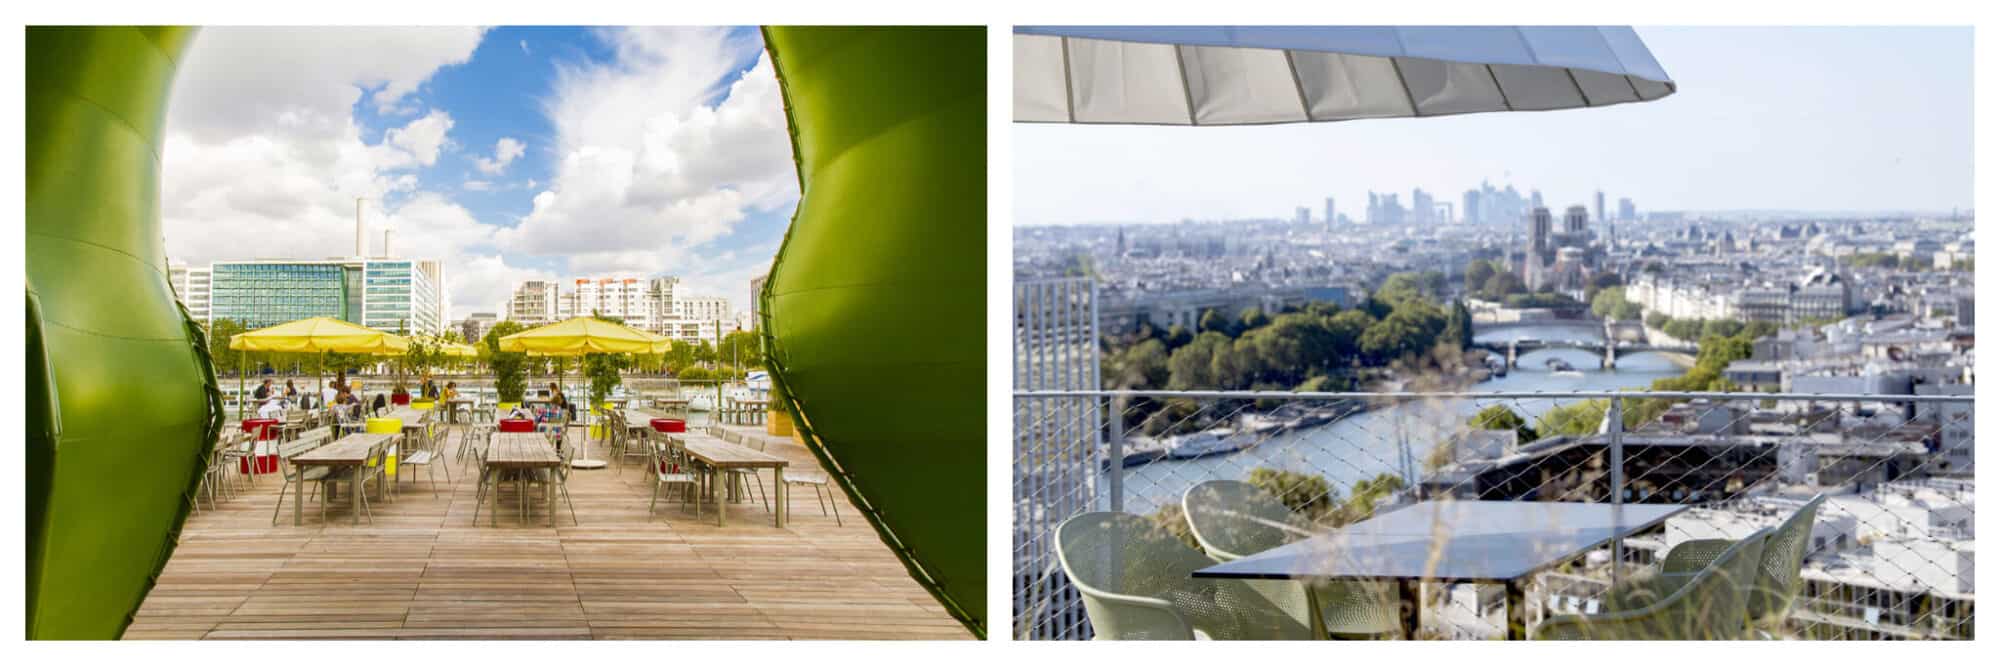 Left: the image is framed by a green, curved archway. It is the wooden terrace of Wanderlust Street Food. There are wooden tables and yellow umbrellas. You can see modern Paris buildings in the background. Right: A table and four chairs on a rooftop, underneath an umbrella, with a view of the Seine and Paris in the background. You can see La Defense in the distance.